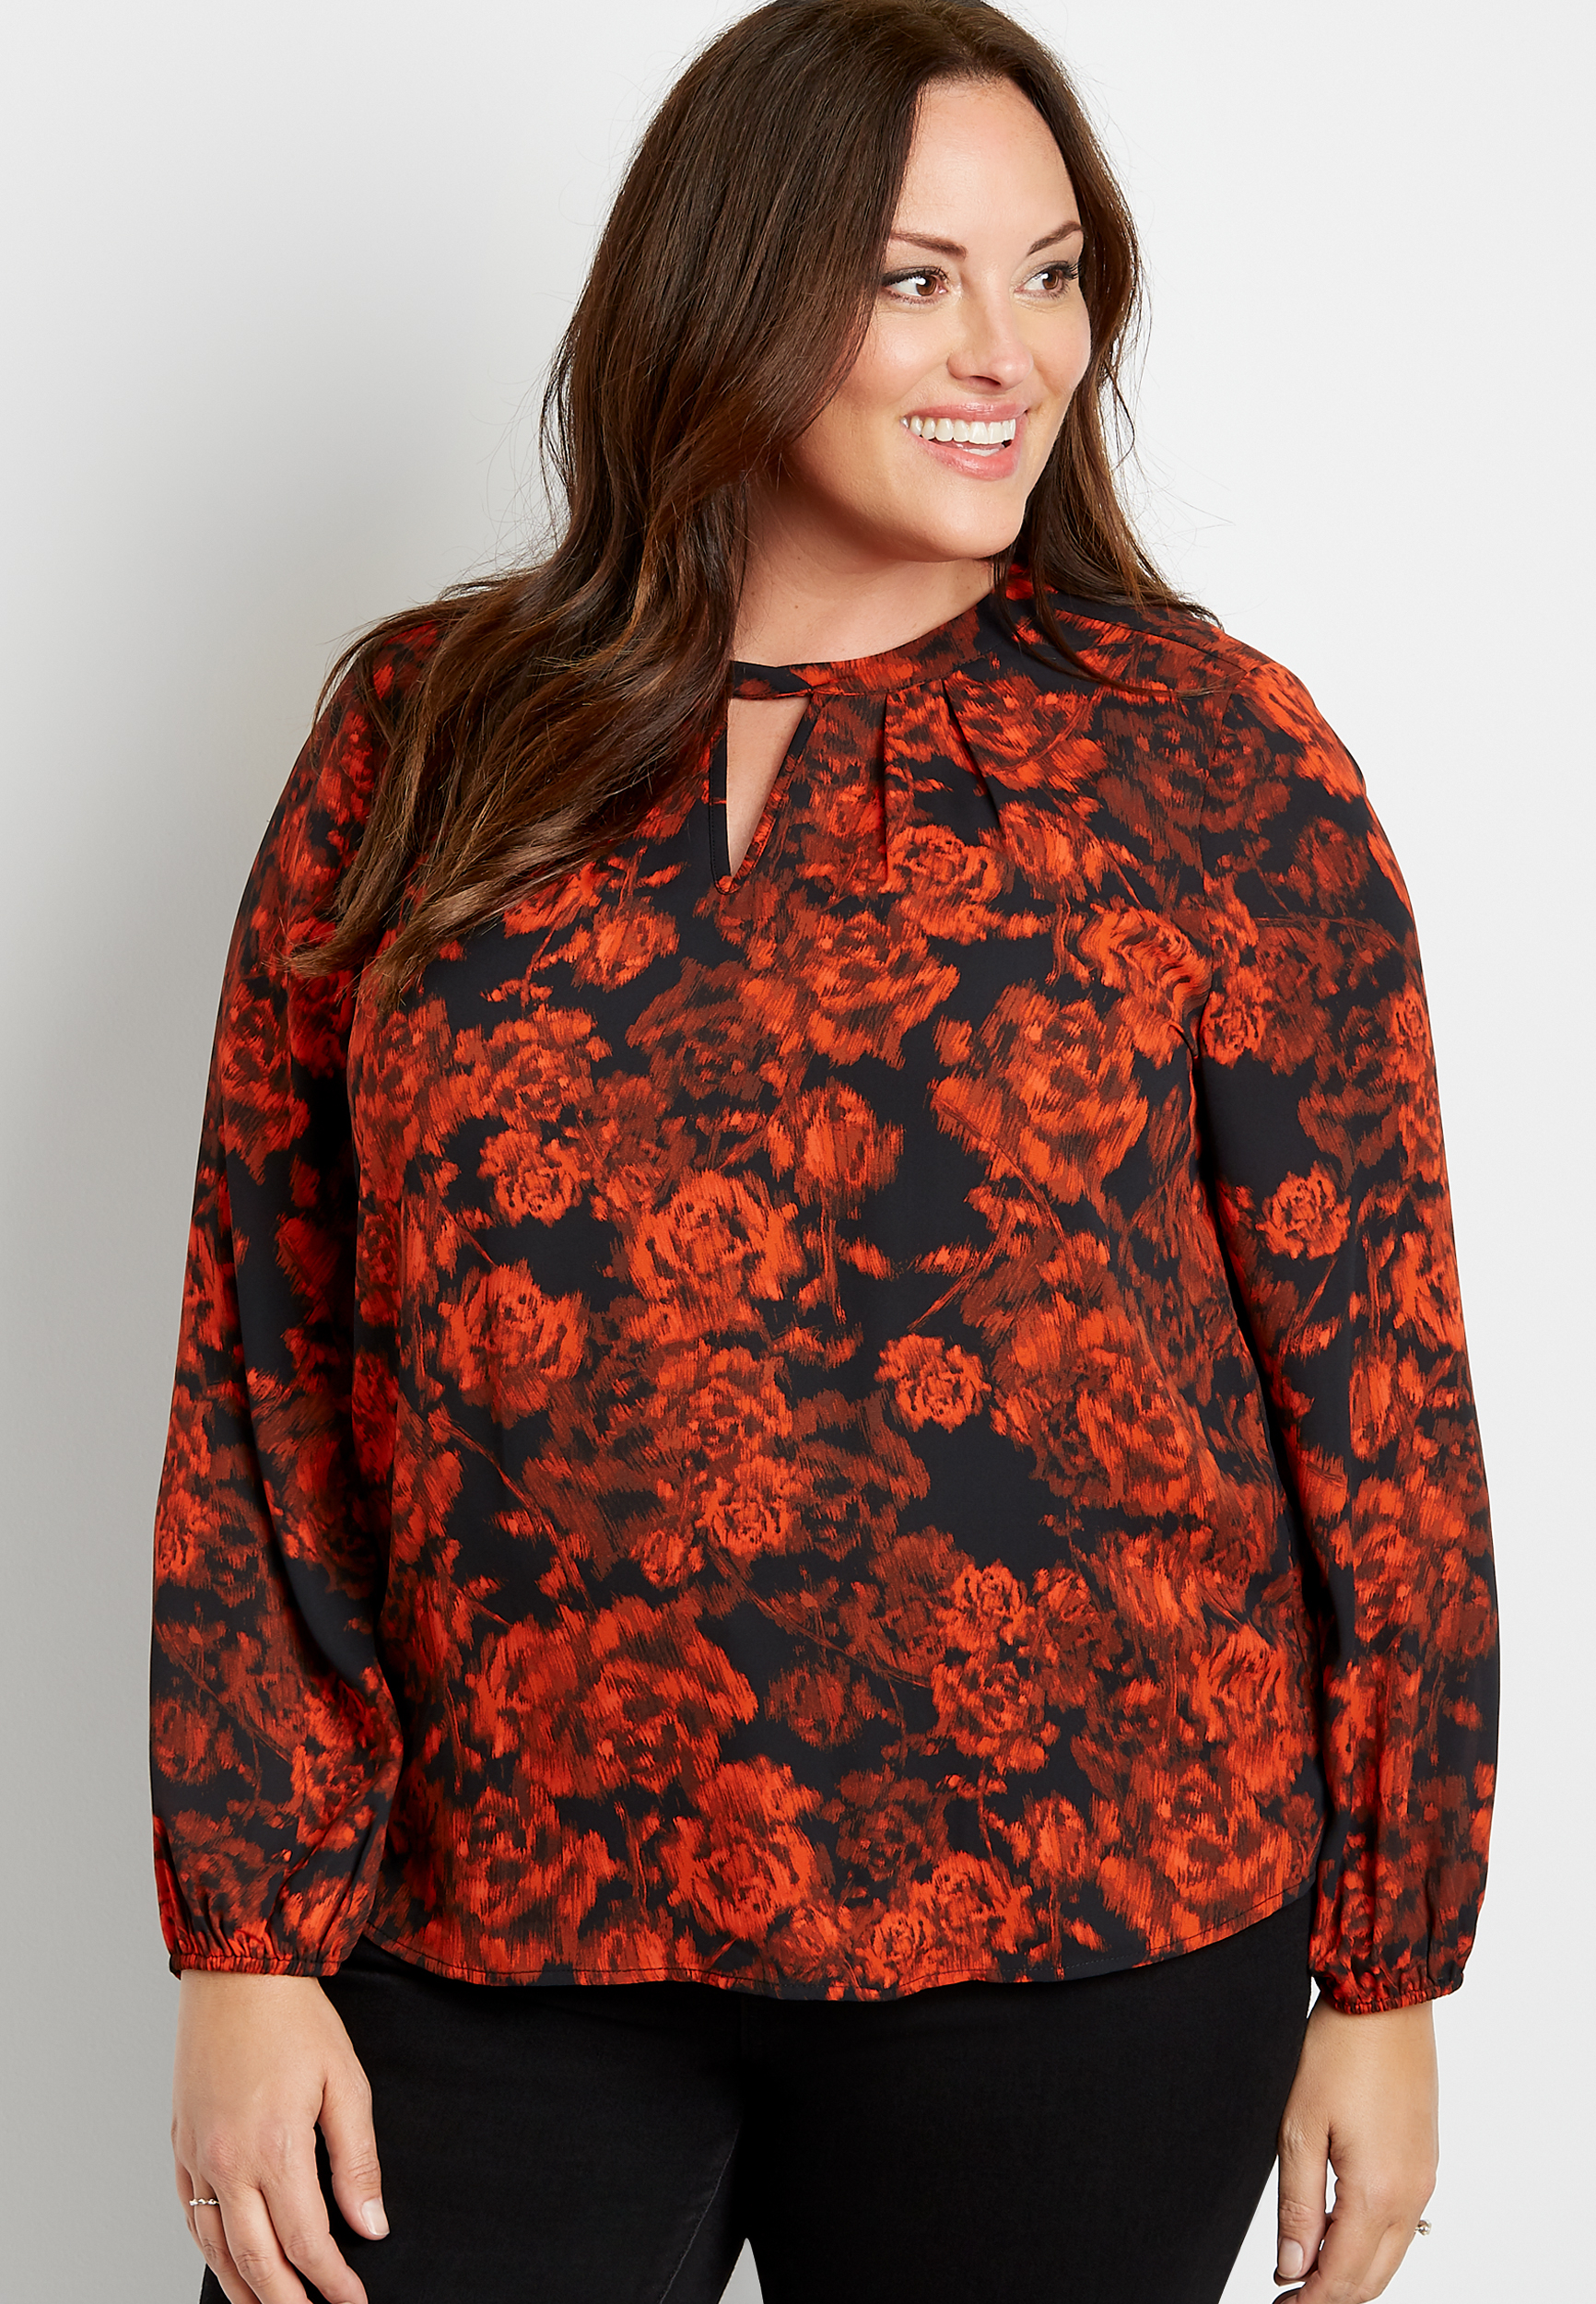 Black Plus Size Tops | maurices